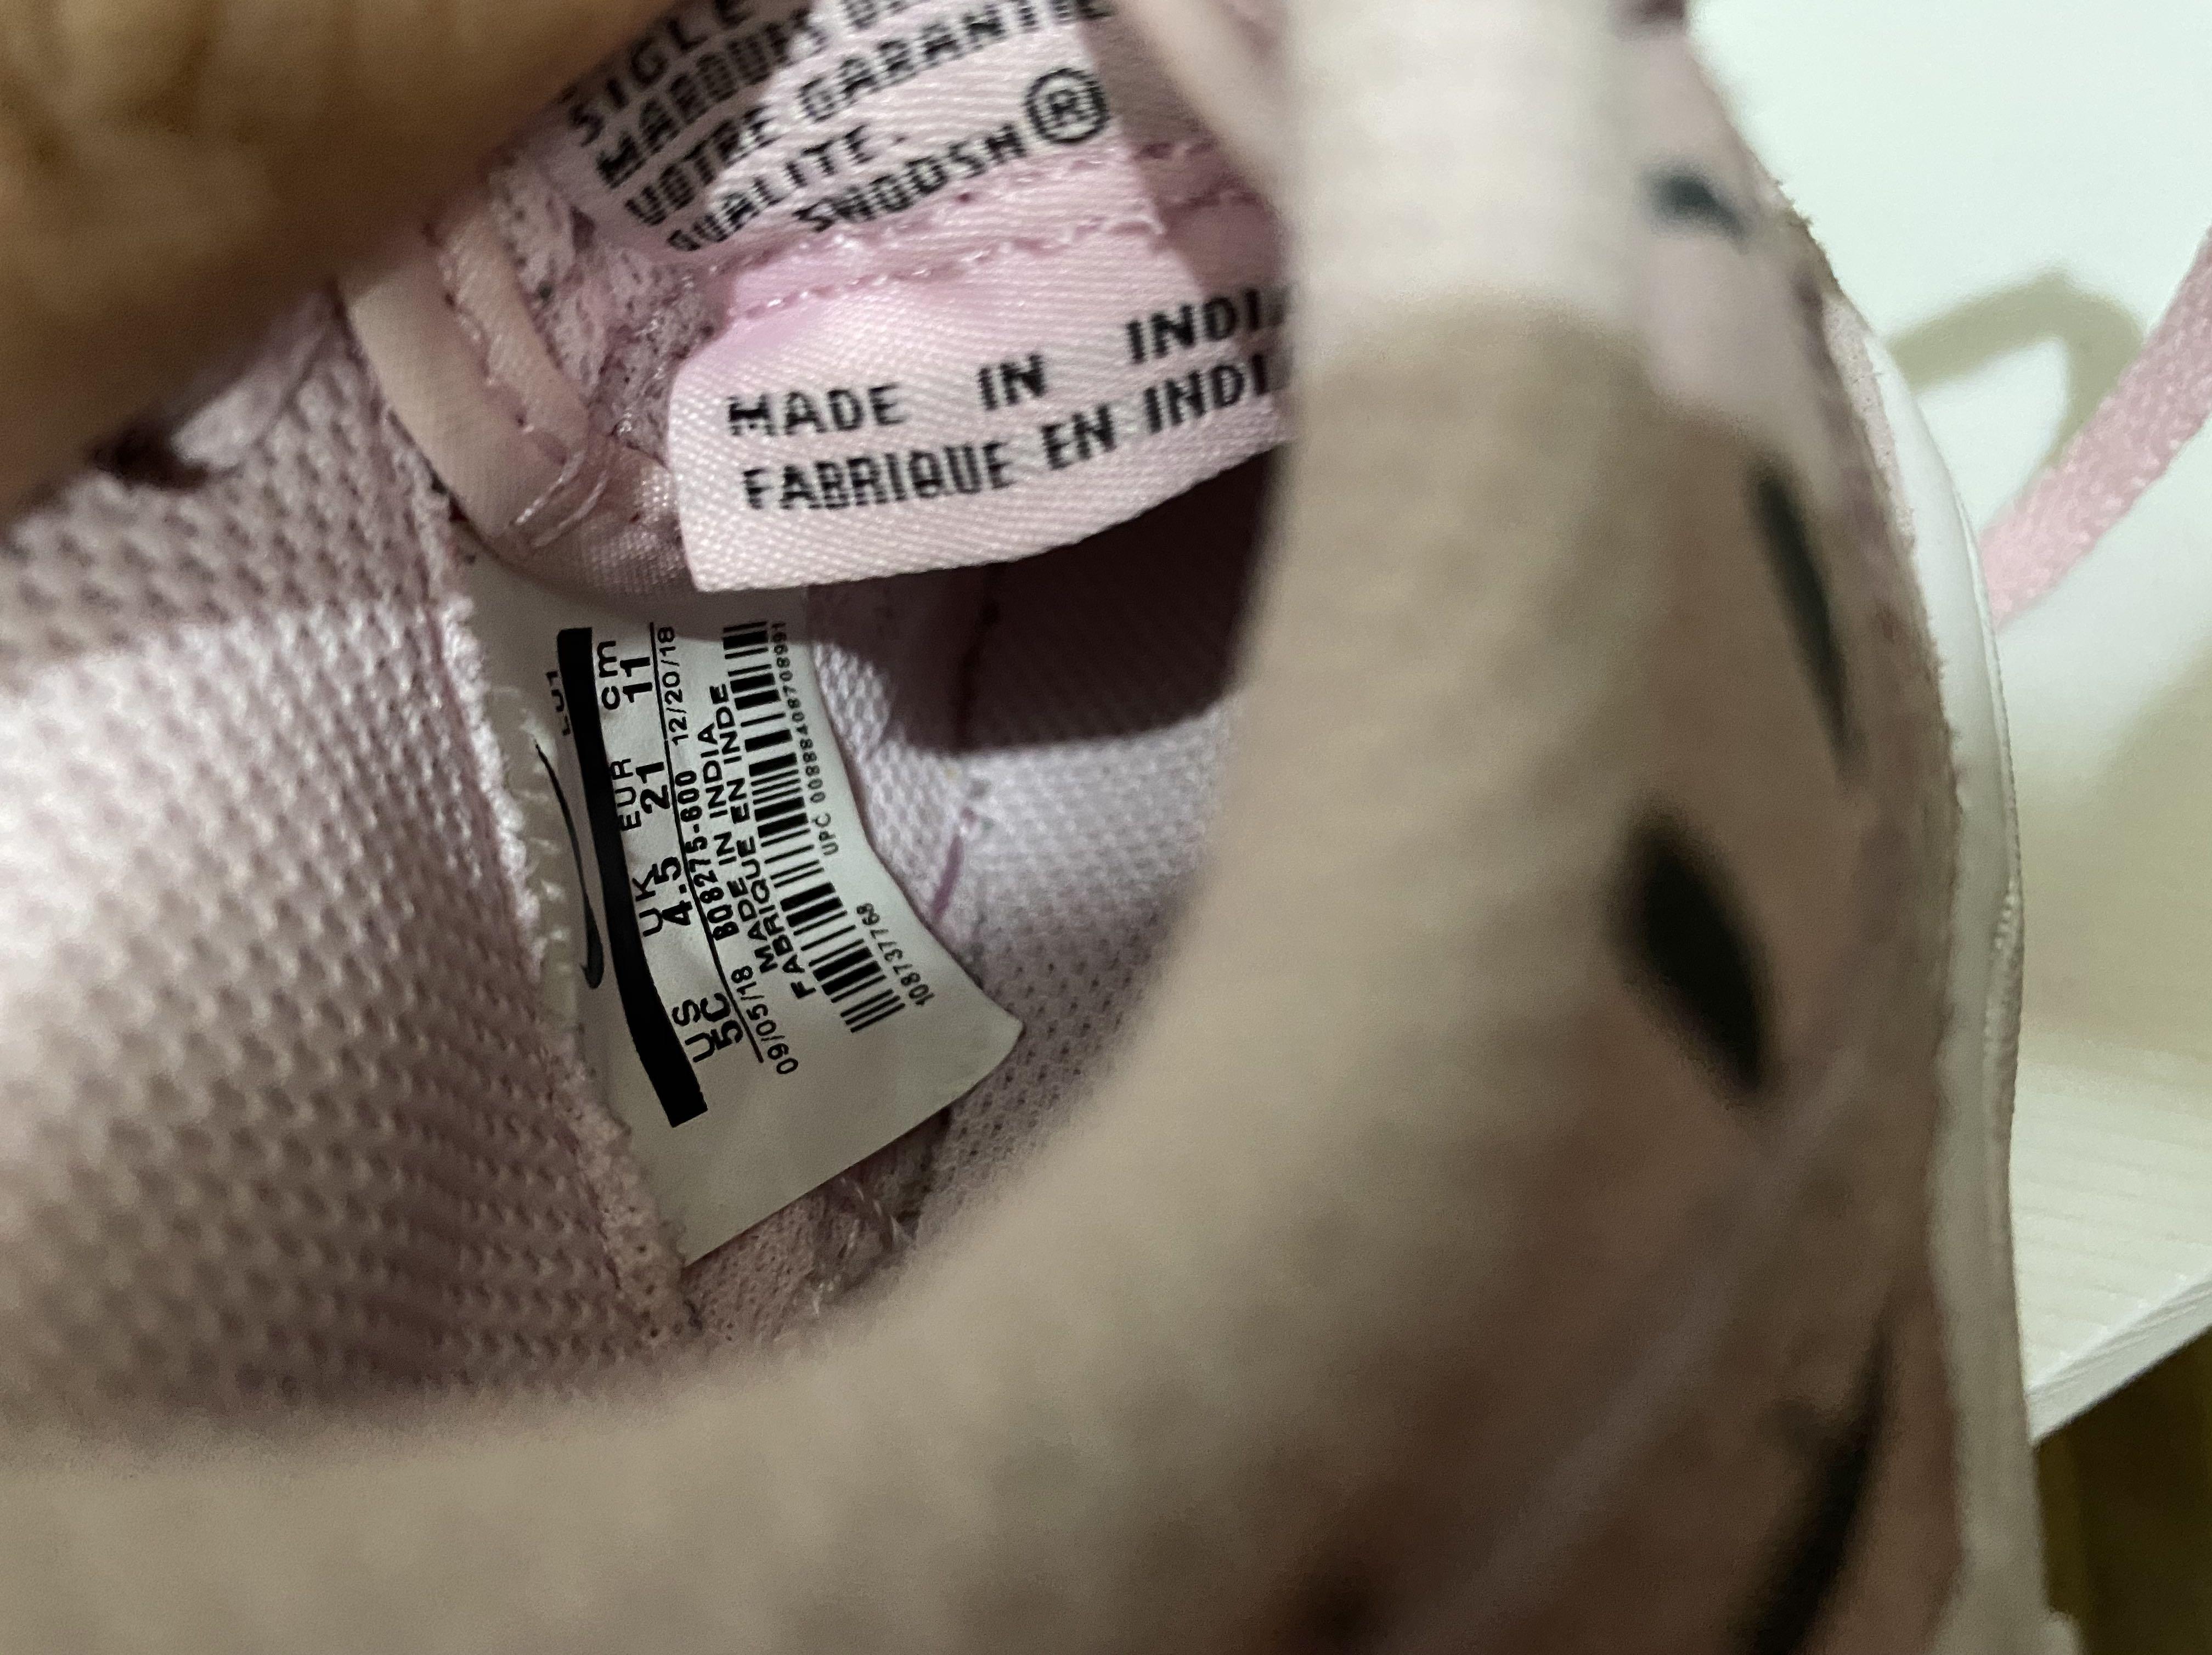 Shop Nike Toddler Air Force 1 Lv8 2 Have A Nike Day BQ8275-600 pink